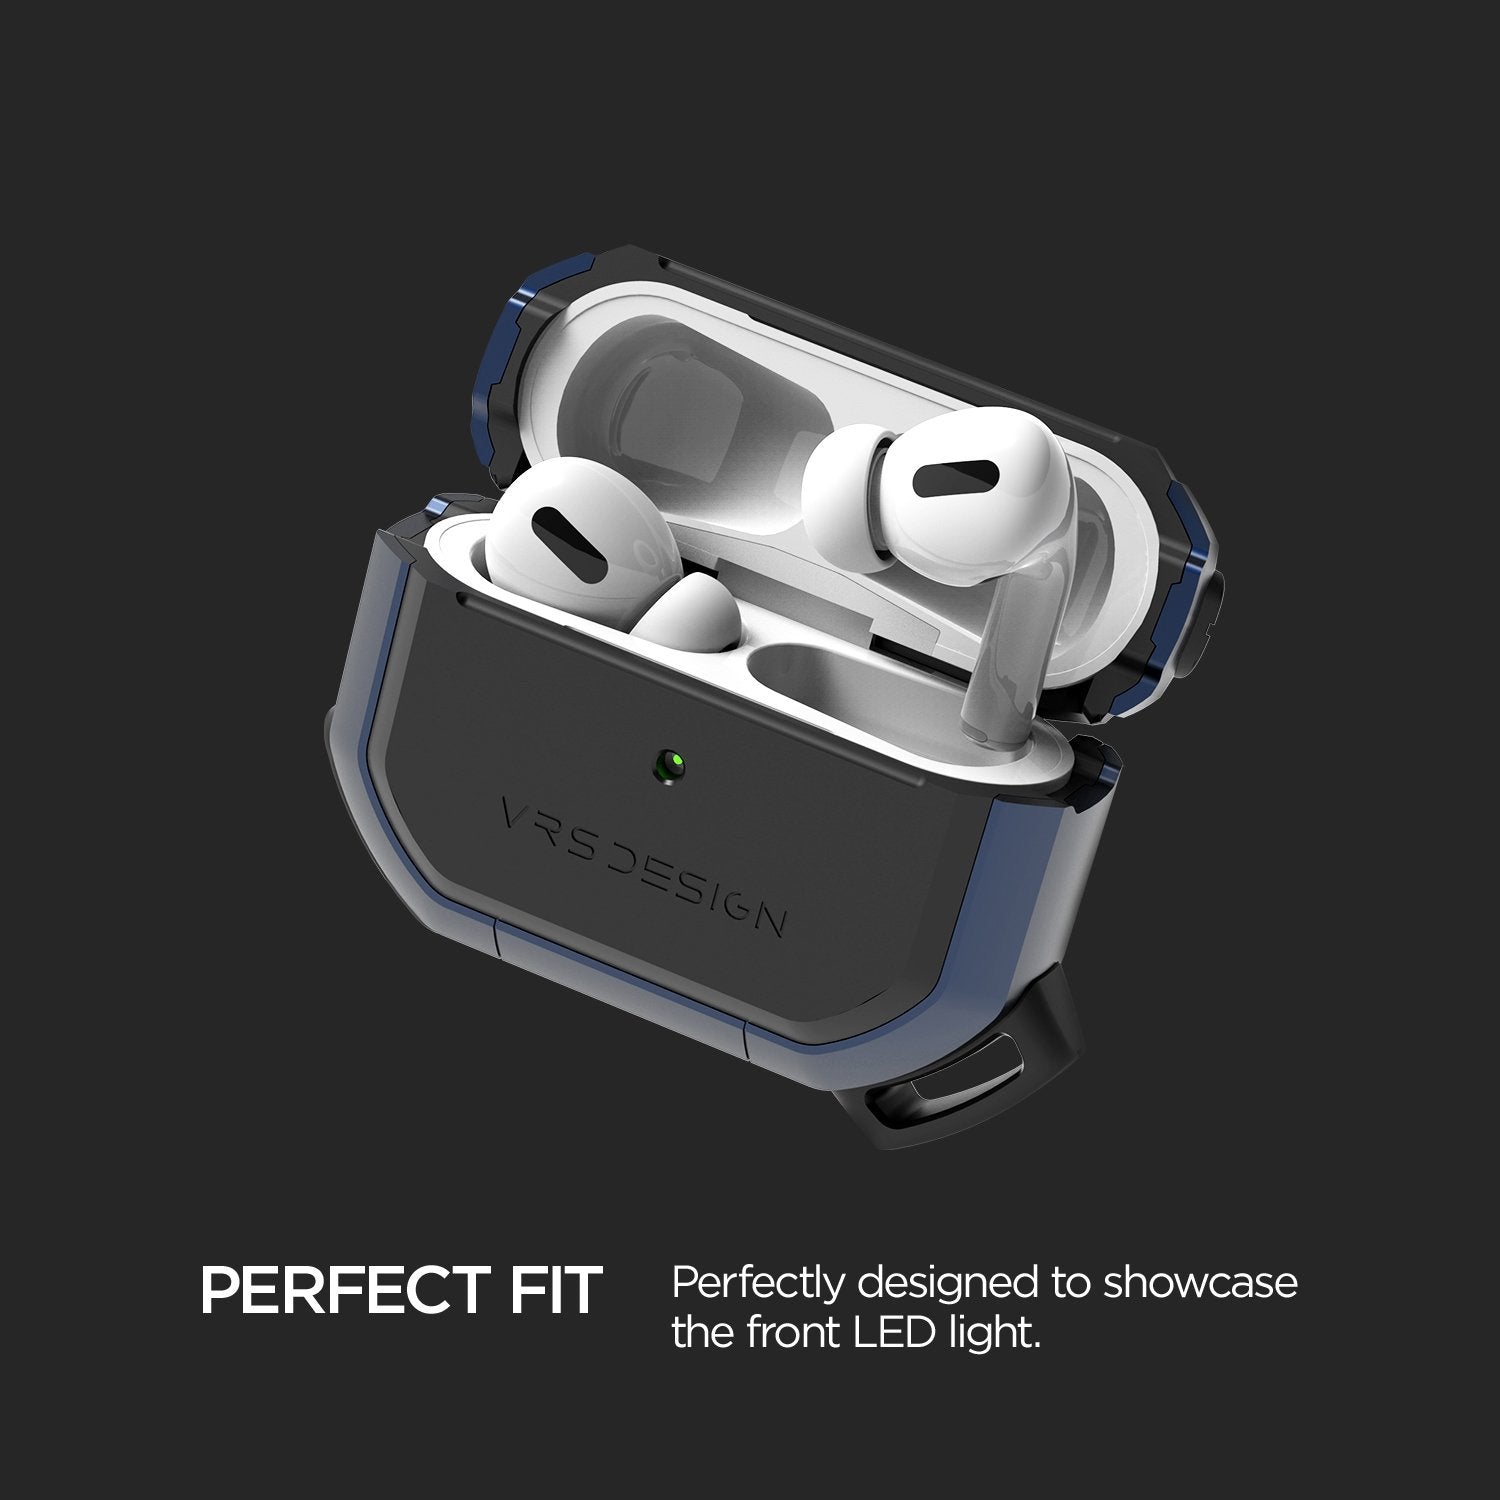 VRS Design Active Case for AirPods Pro